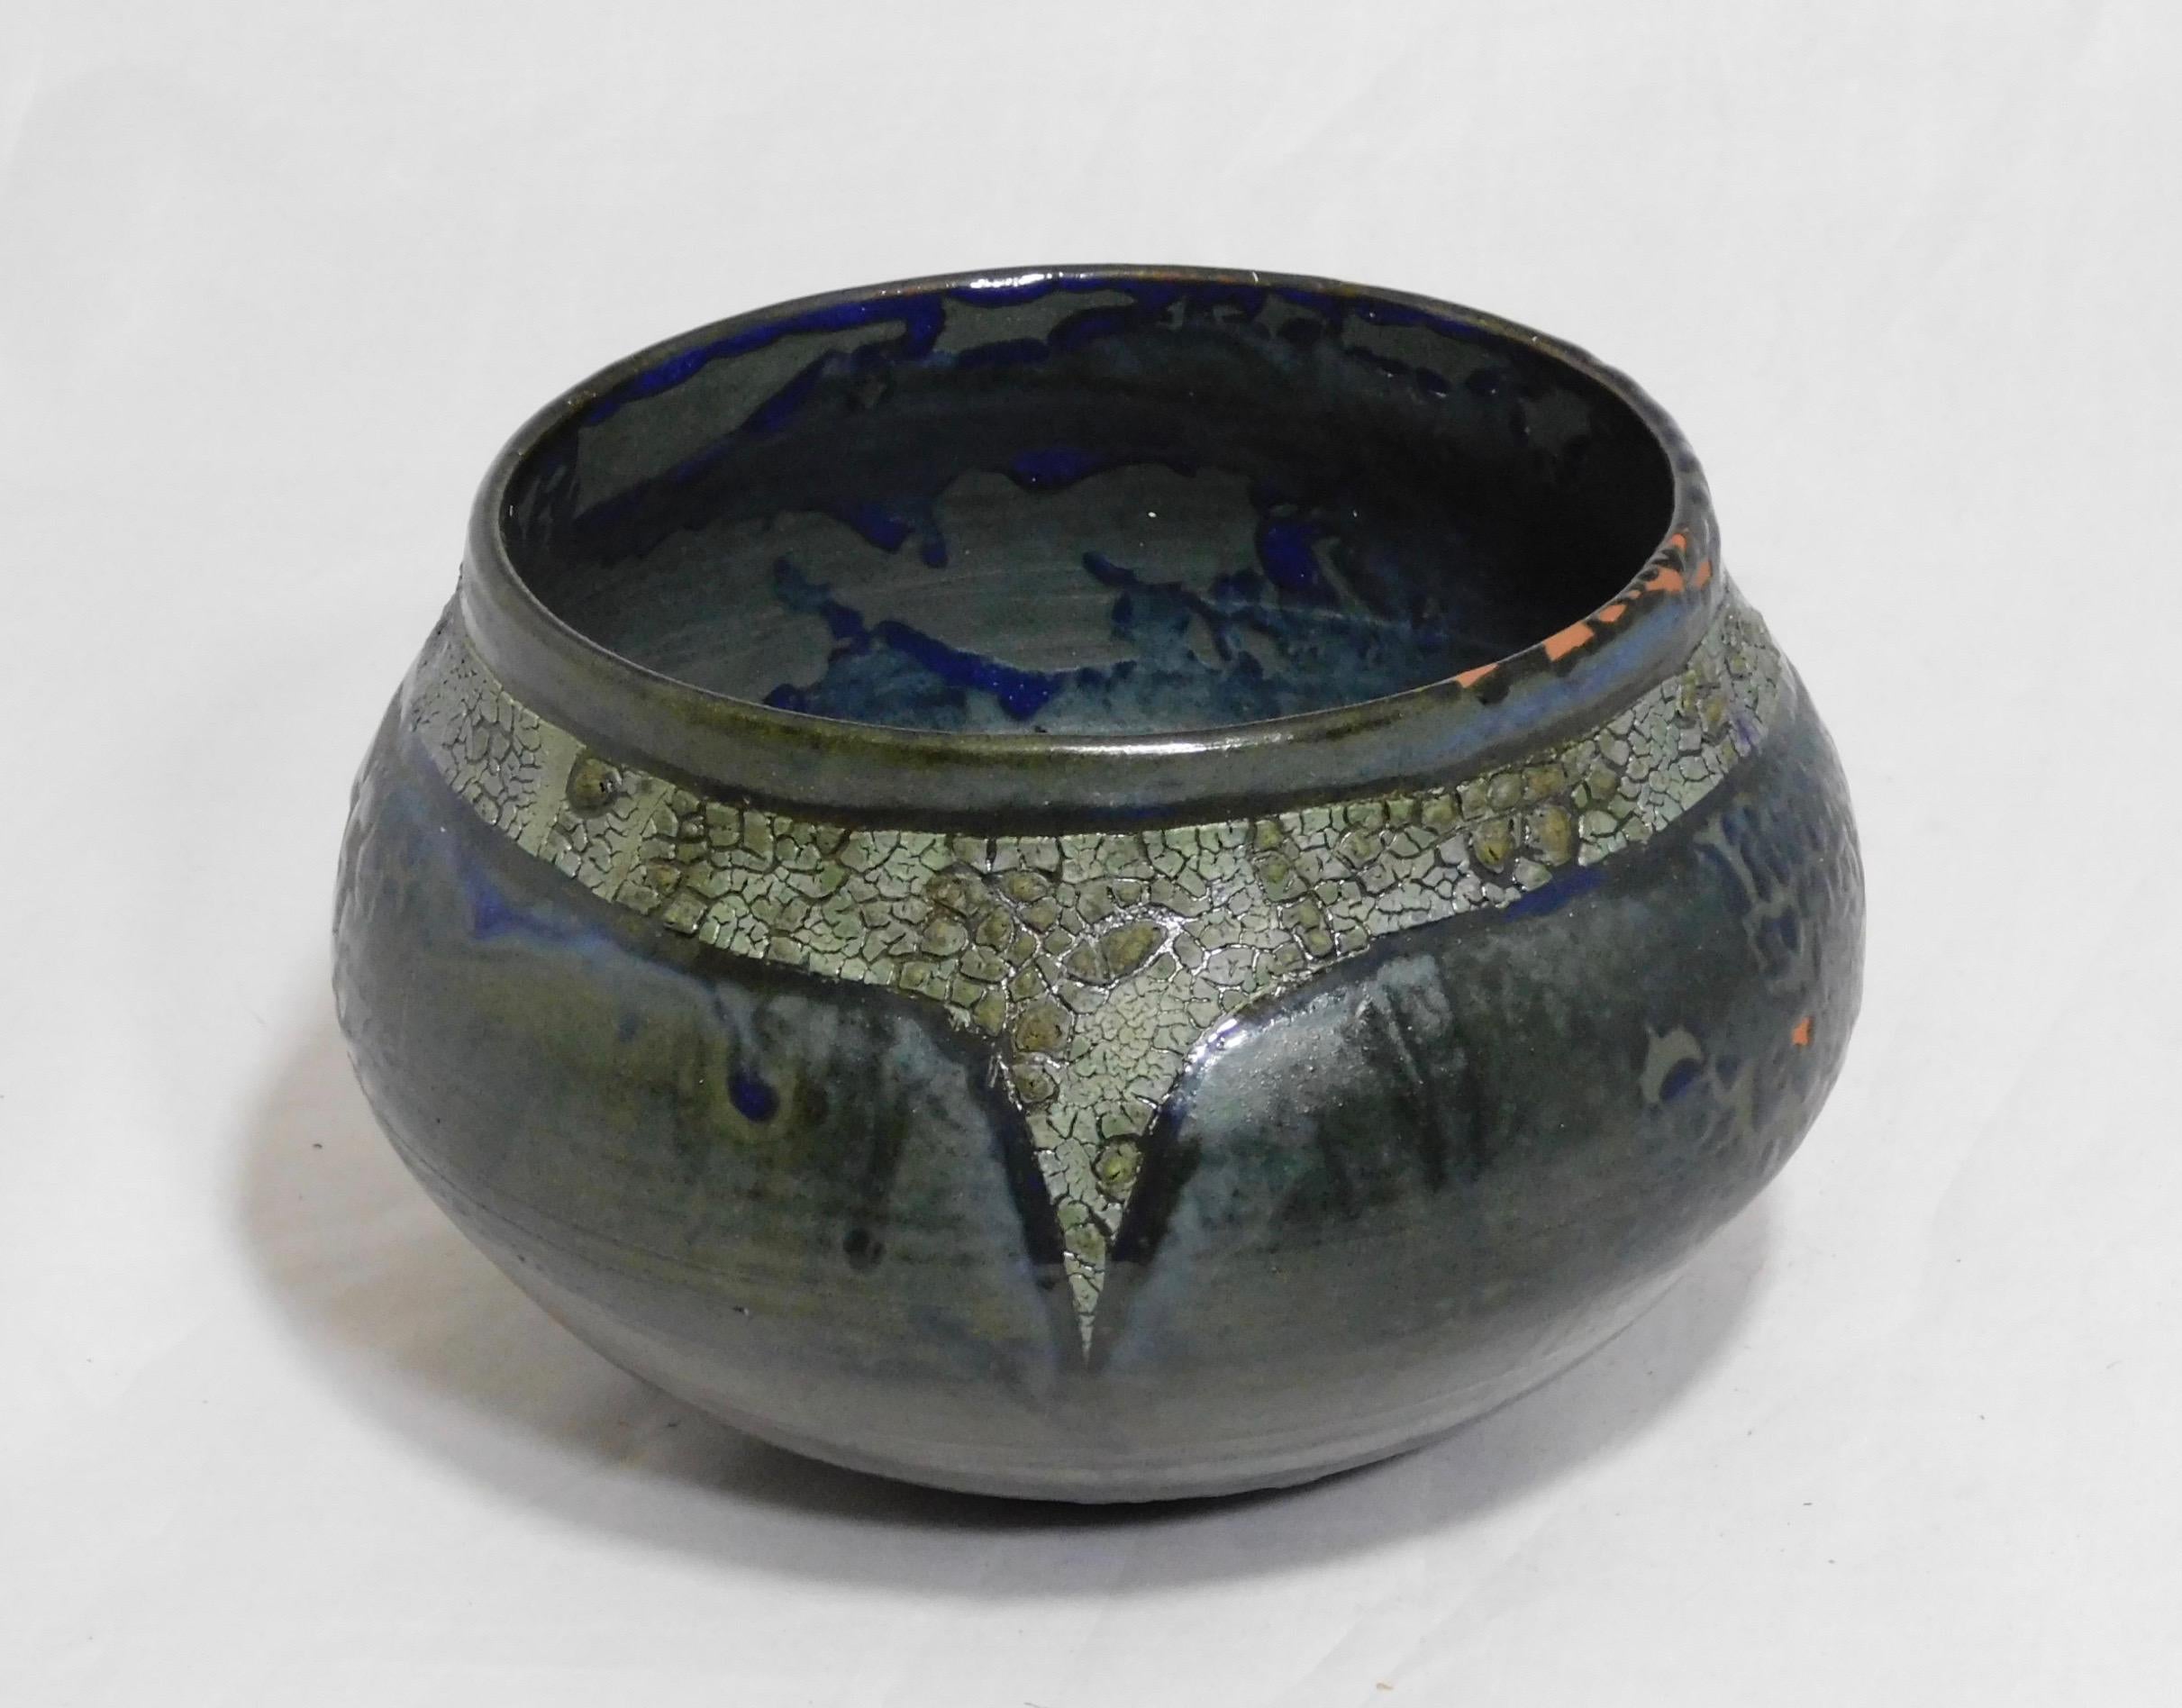 Wheel thrown Wabasso earthenware vessel by ceramicist Andrew Wilder. This is a one of a kind object made in the ancient way- by hand in a small artisanal pottery. In this series Wilder explores the application of lichen under glazes to achieve